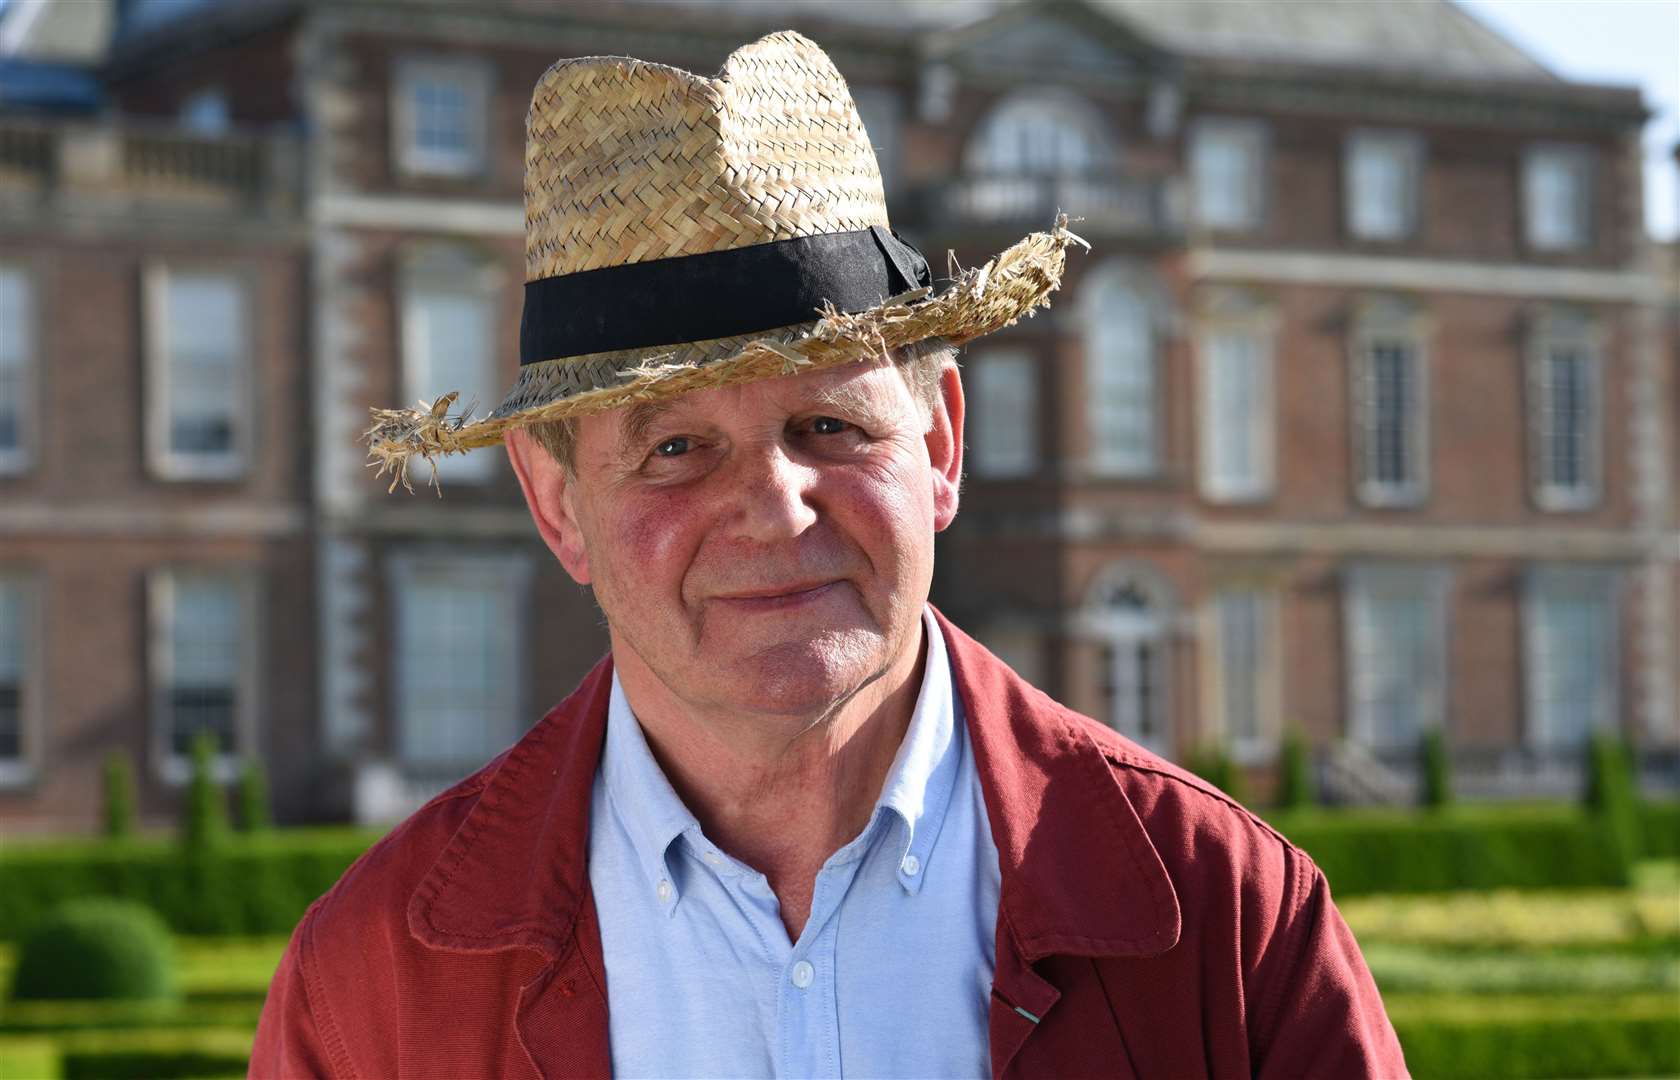 Author Michael Morpurgo will be at the festival